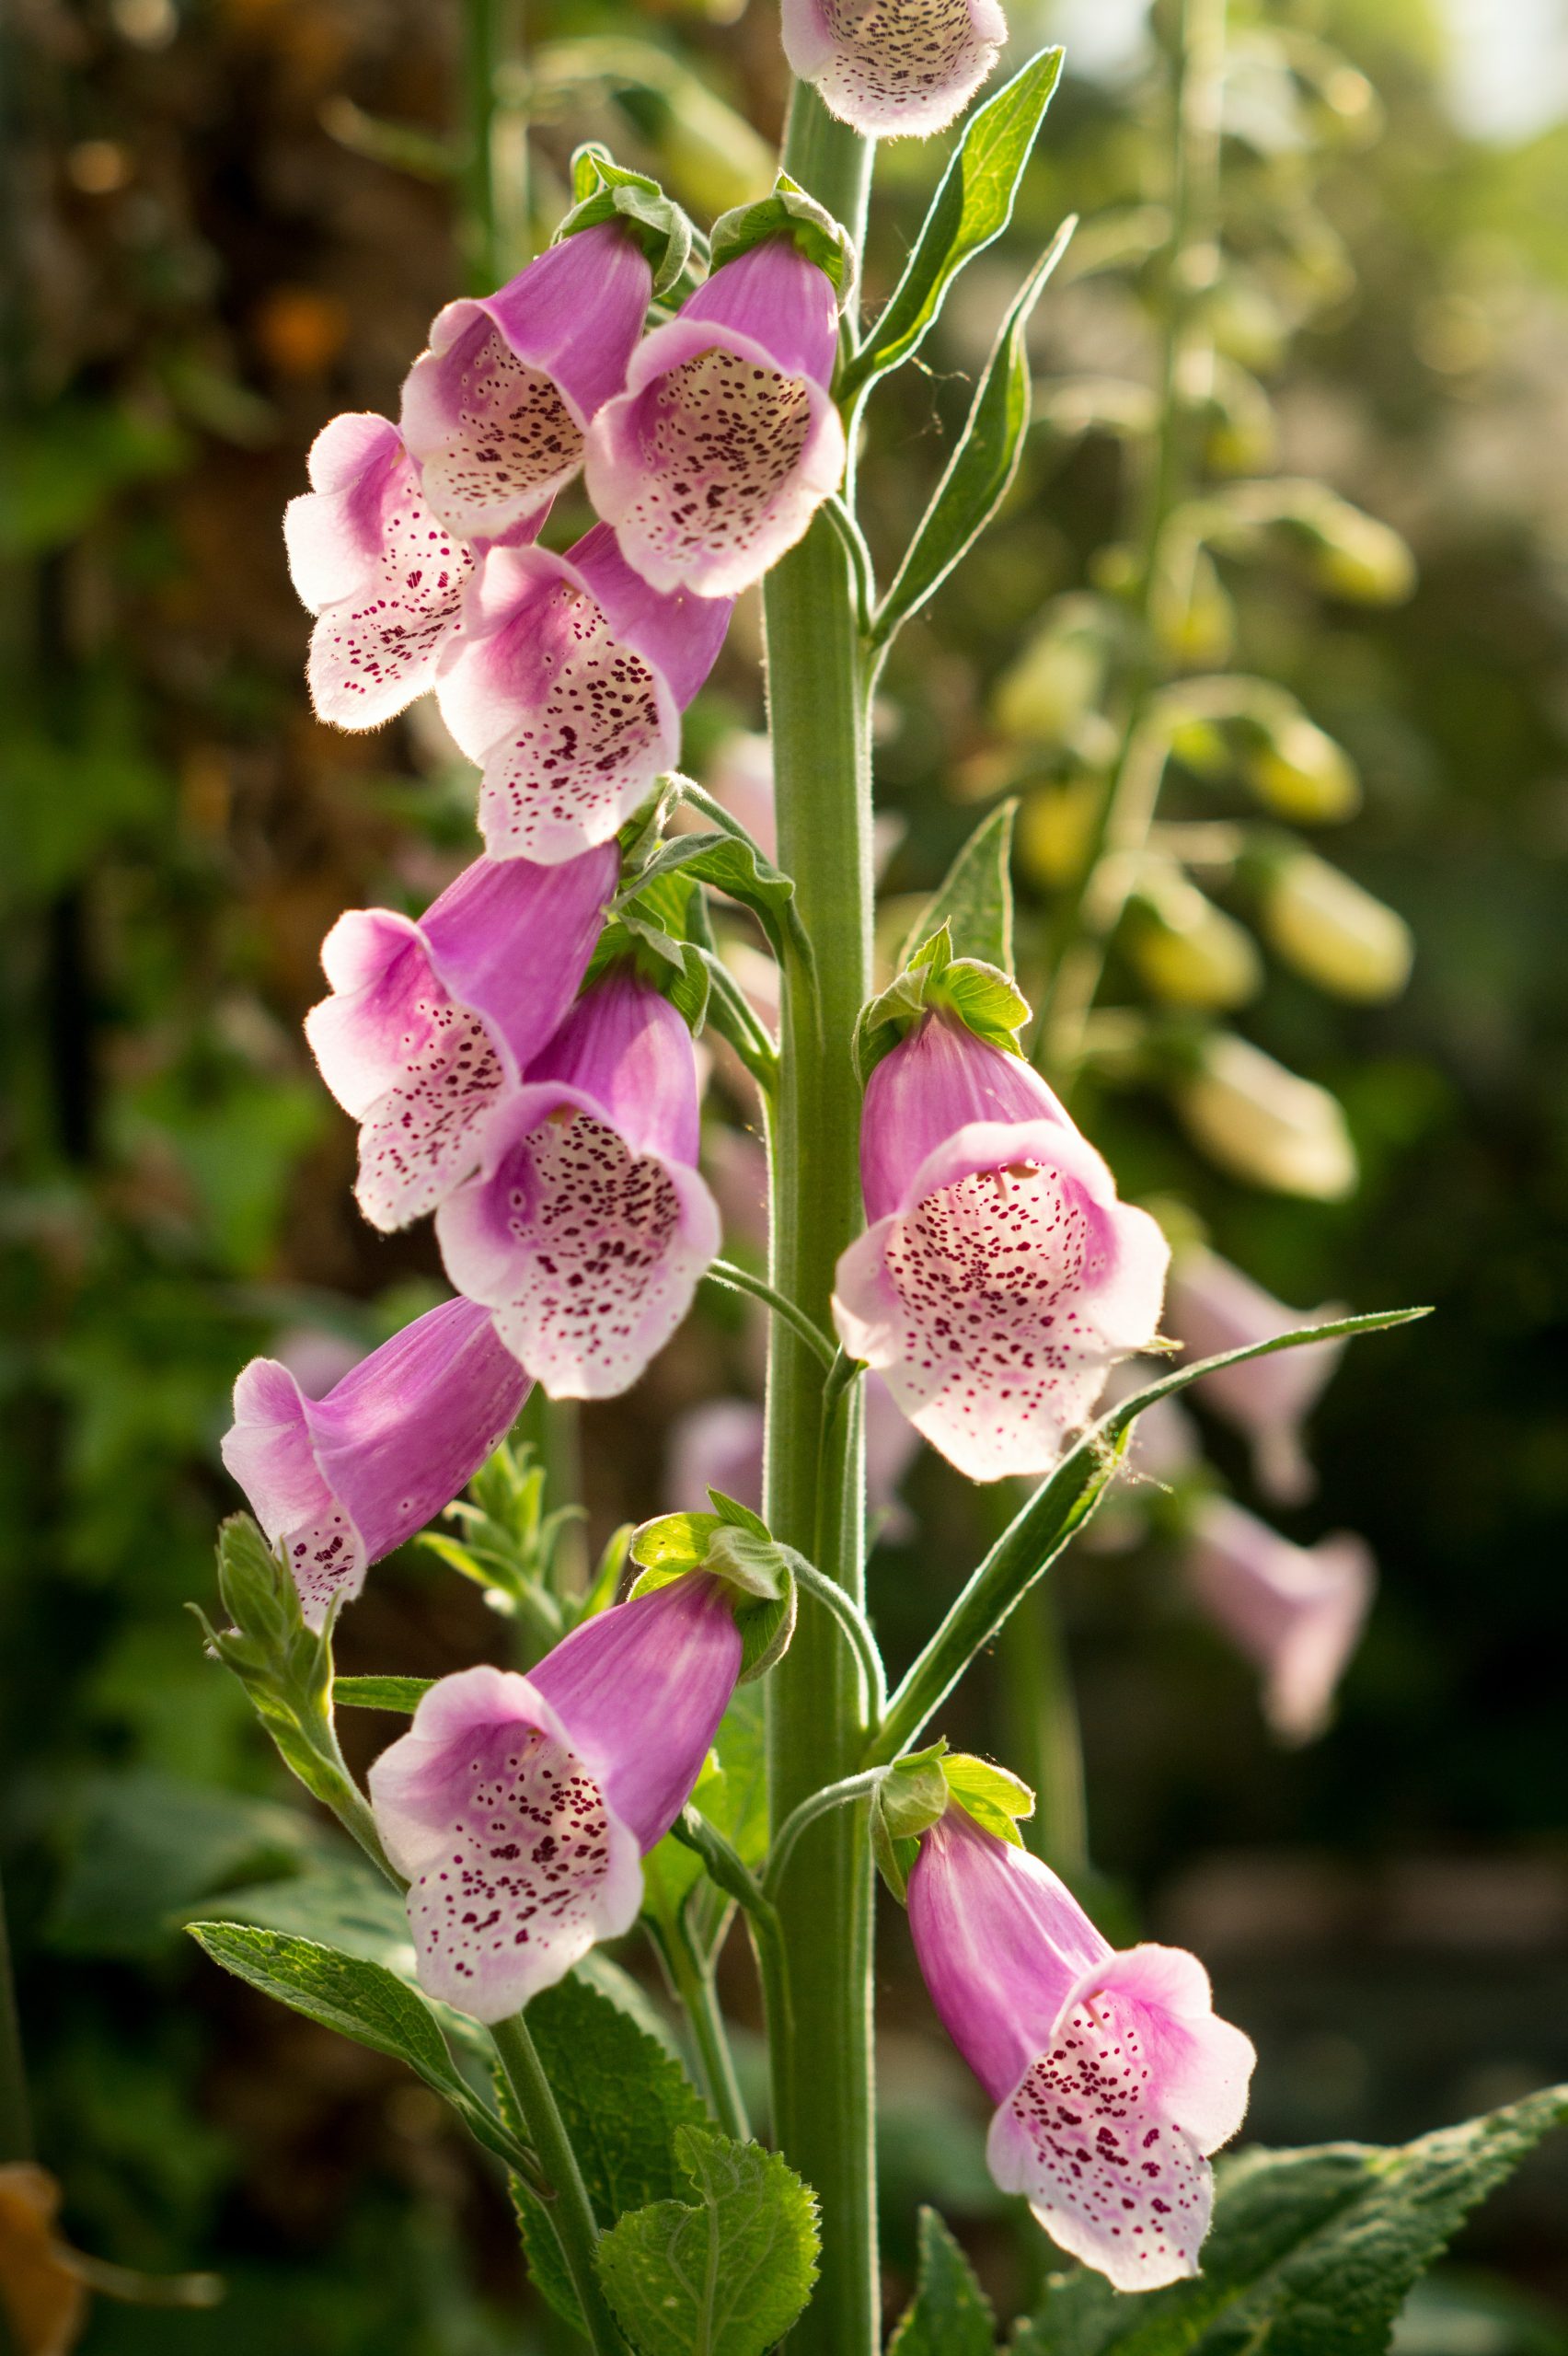 What’s The Difference Between Foxgloves And Hollyhocks?